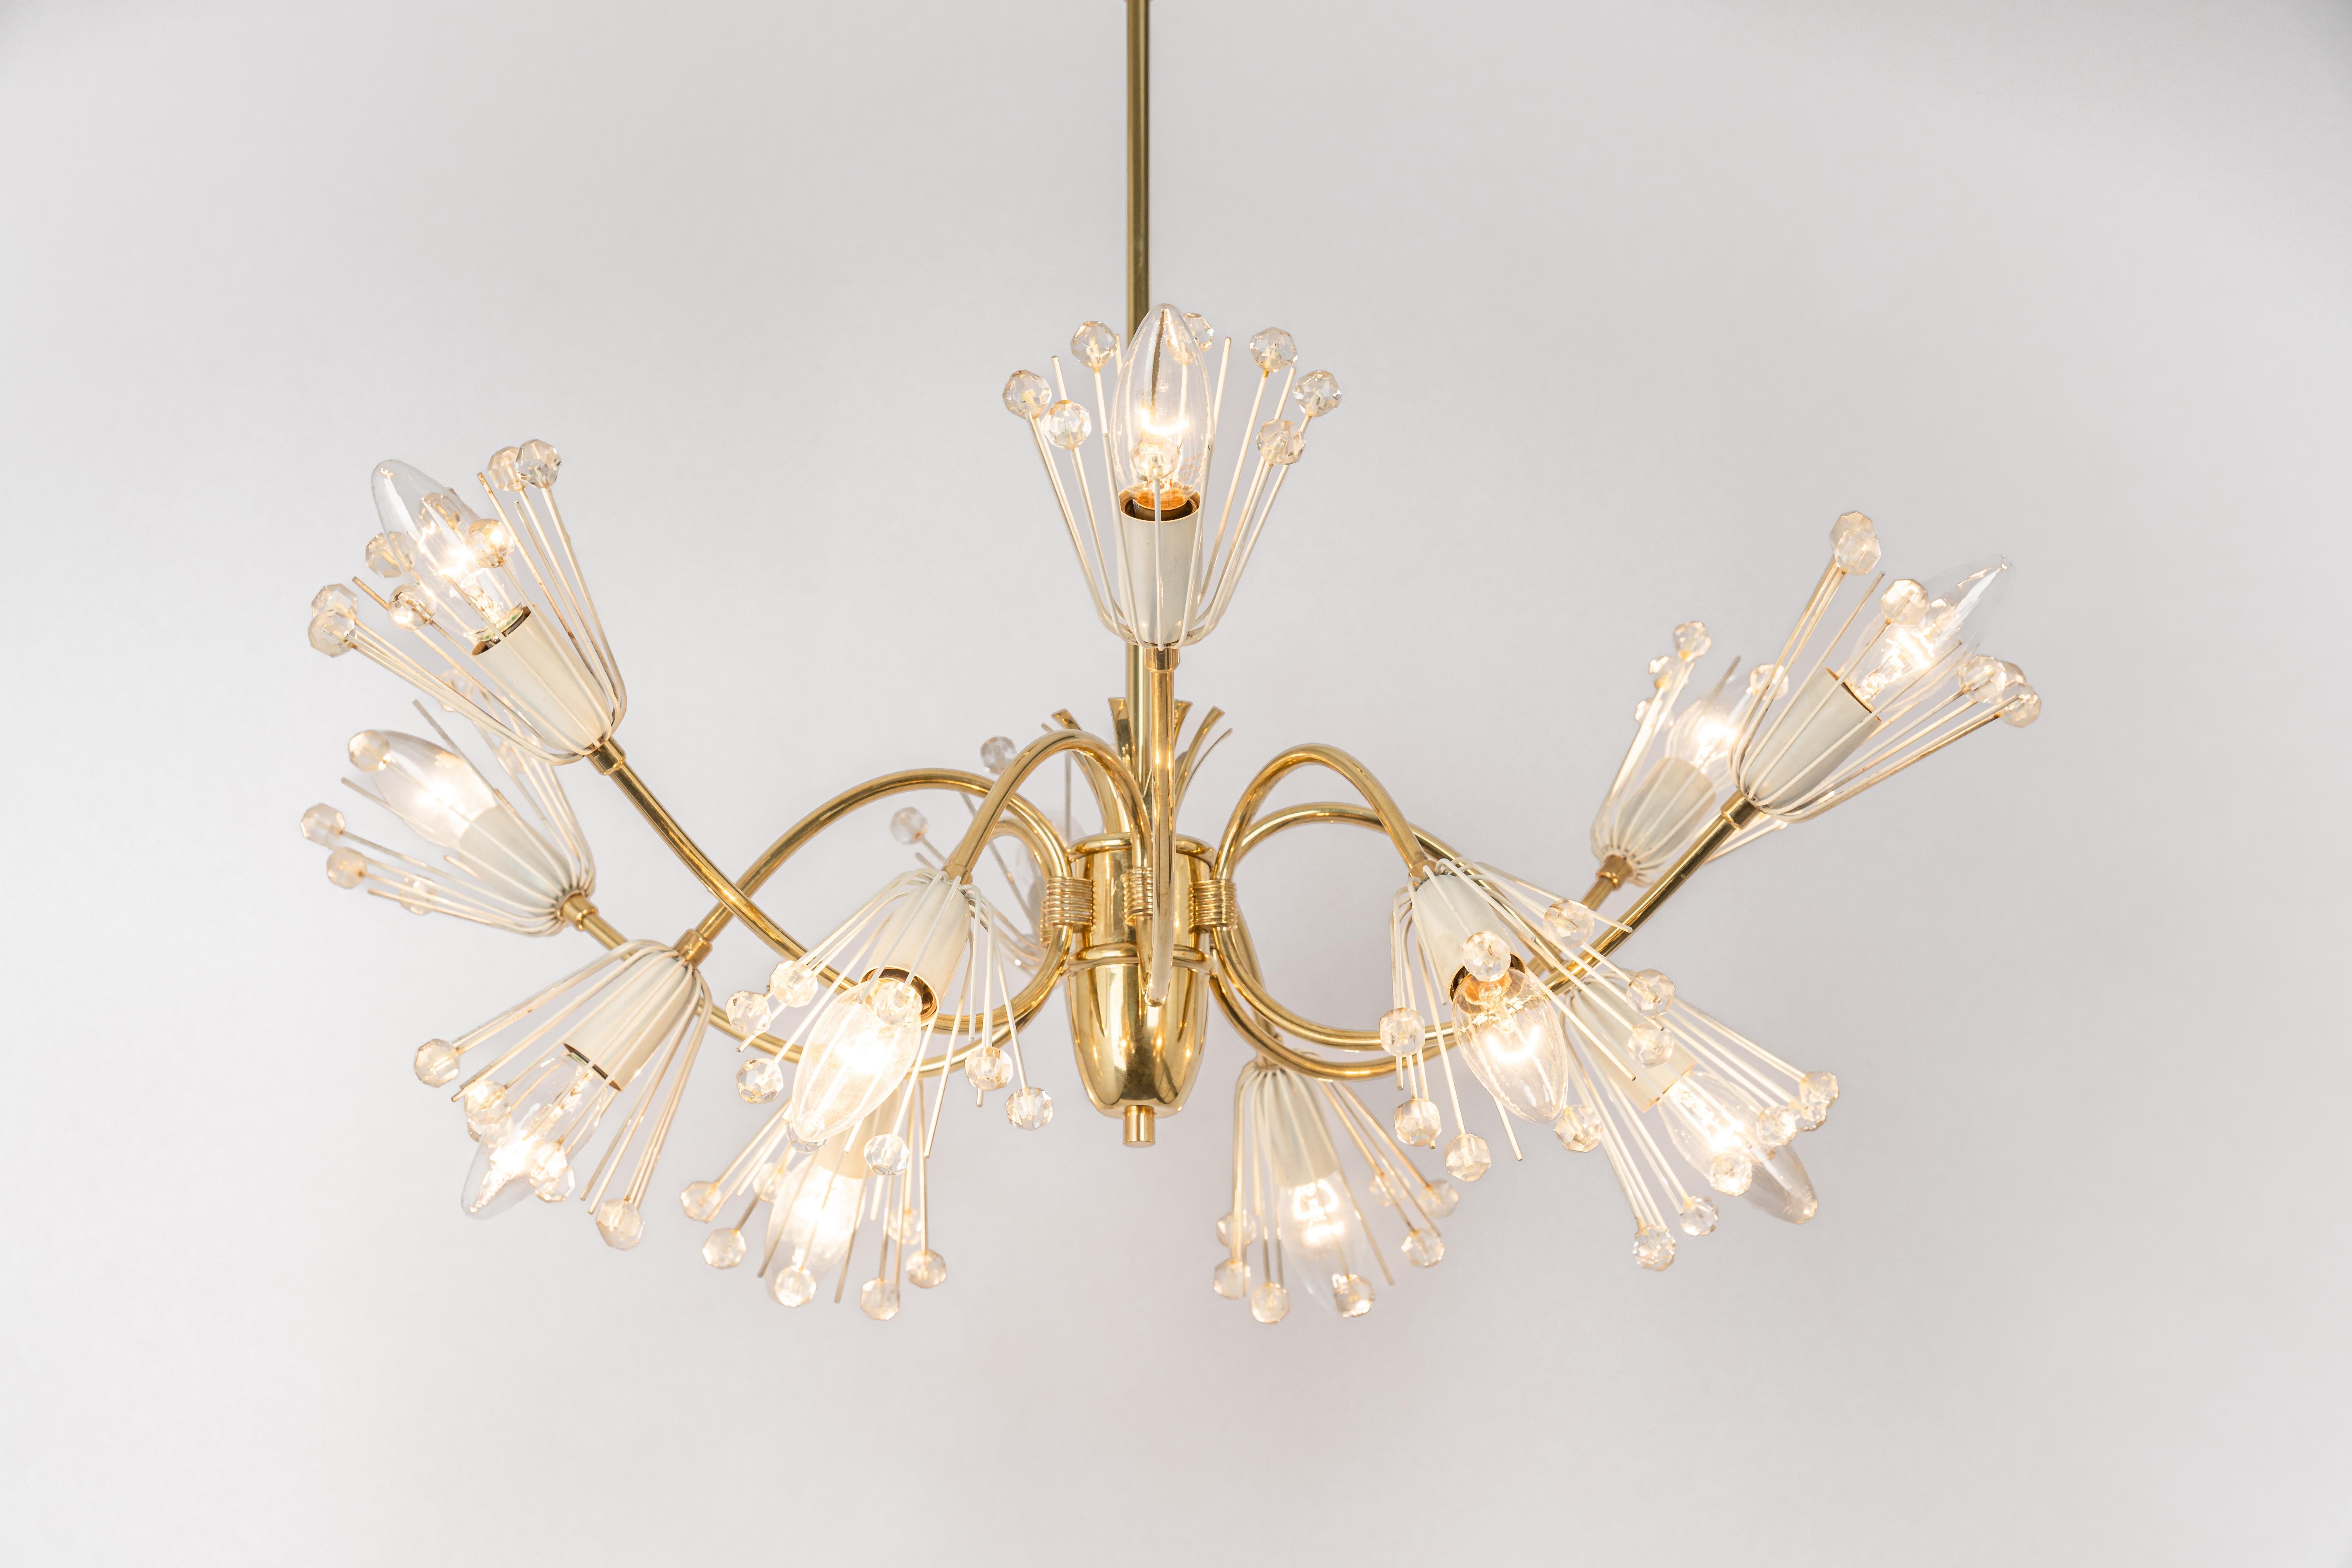 Beautiful large starburst brass chandelier with hundreds of crystals designed by Emil Stejnar for Nikoll, manufactured in Austria, circa 1960s.

Heavy quality and in good condition with small signs of age. Cleaned, well-wired and ready to use. The